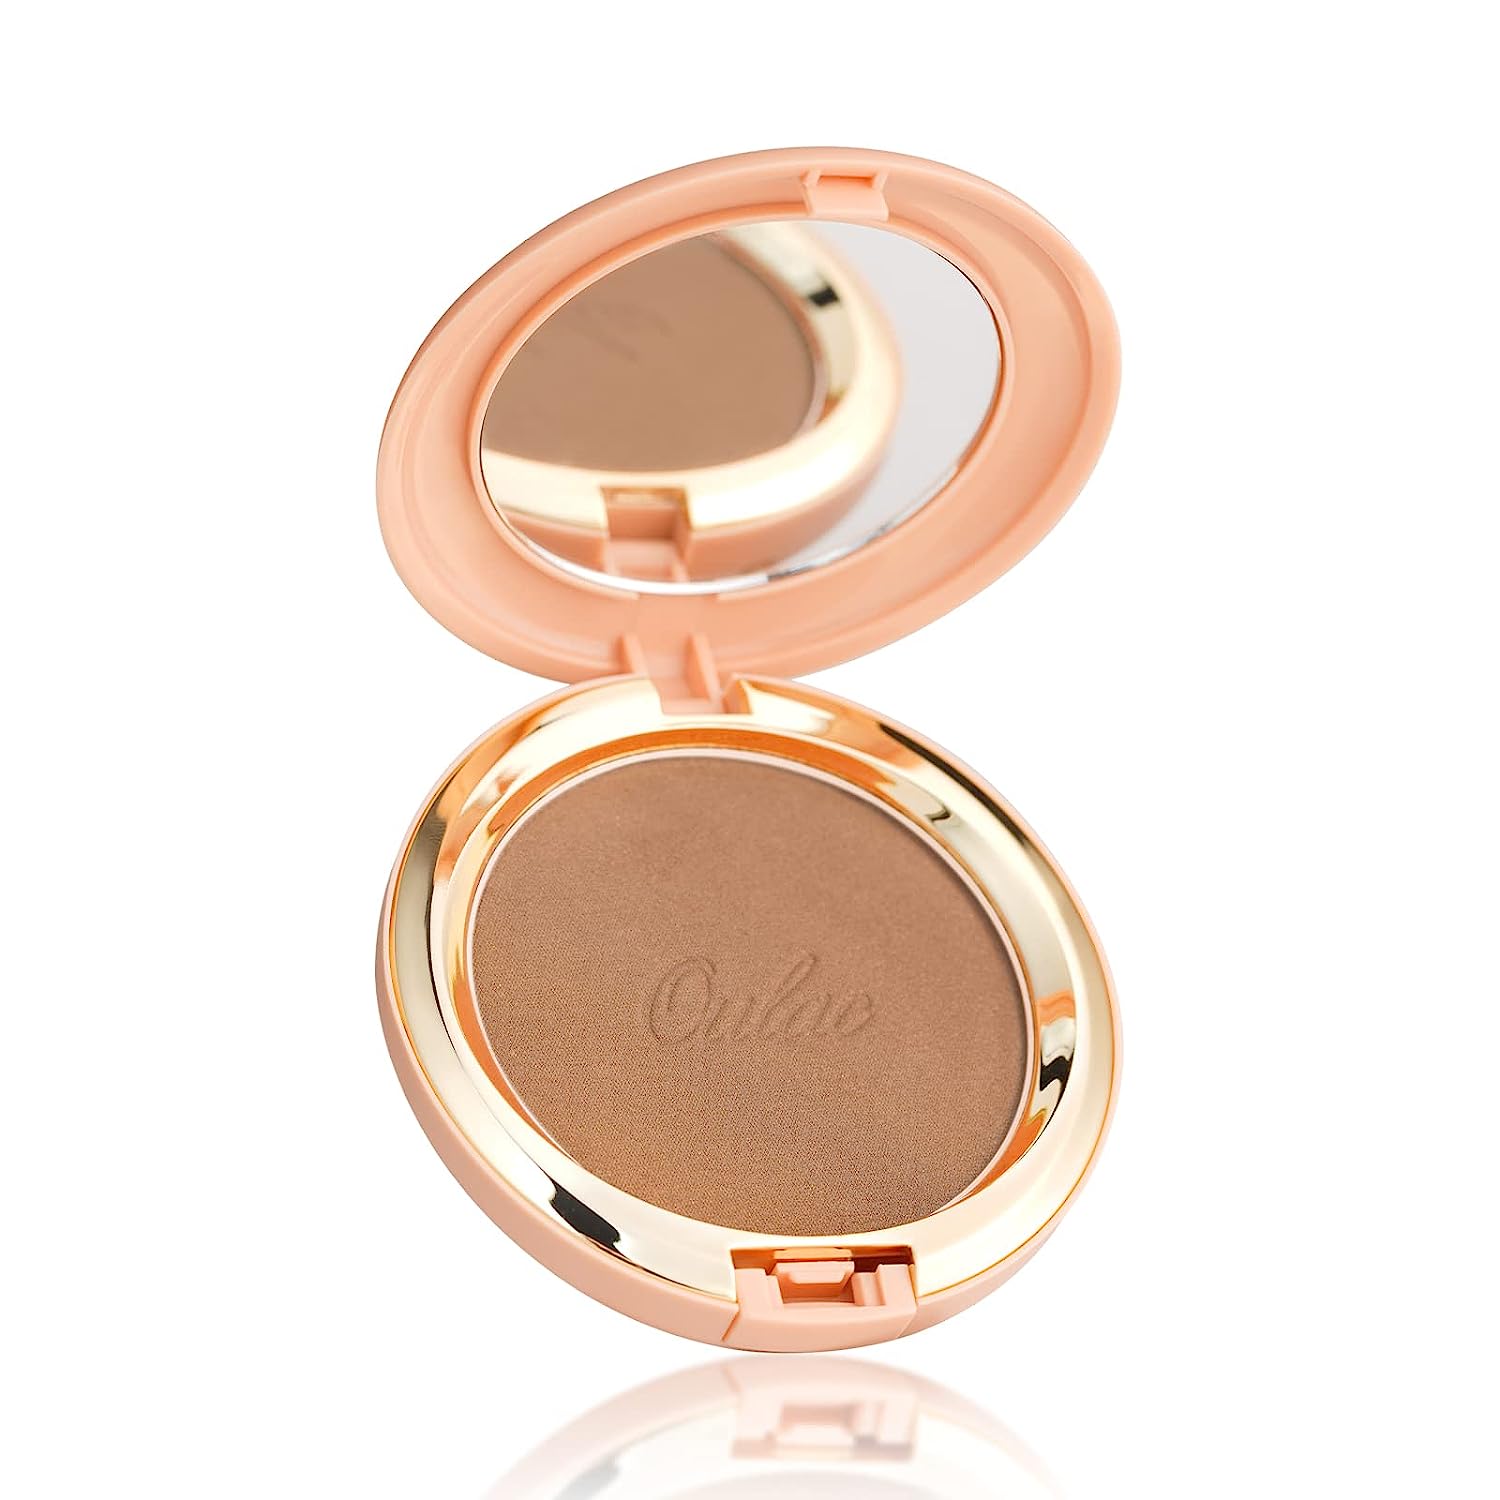 Oulac Sensual Touch Powder, Sun-Pampered Bronzer, Natural Glow Thanks to our subtly shimmering bronze powder